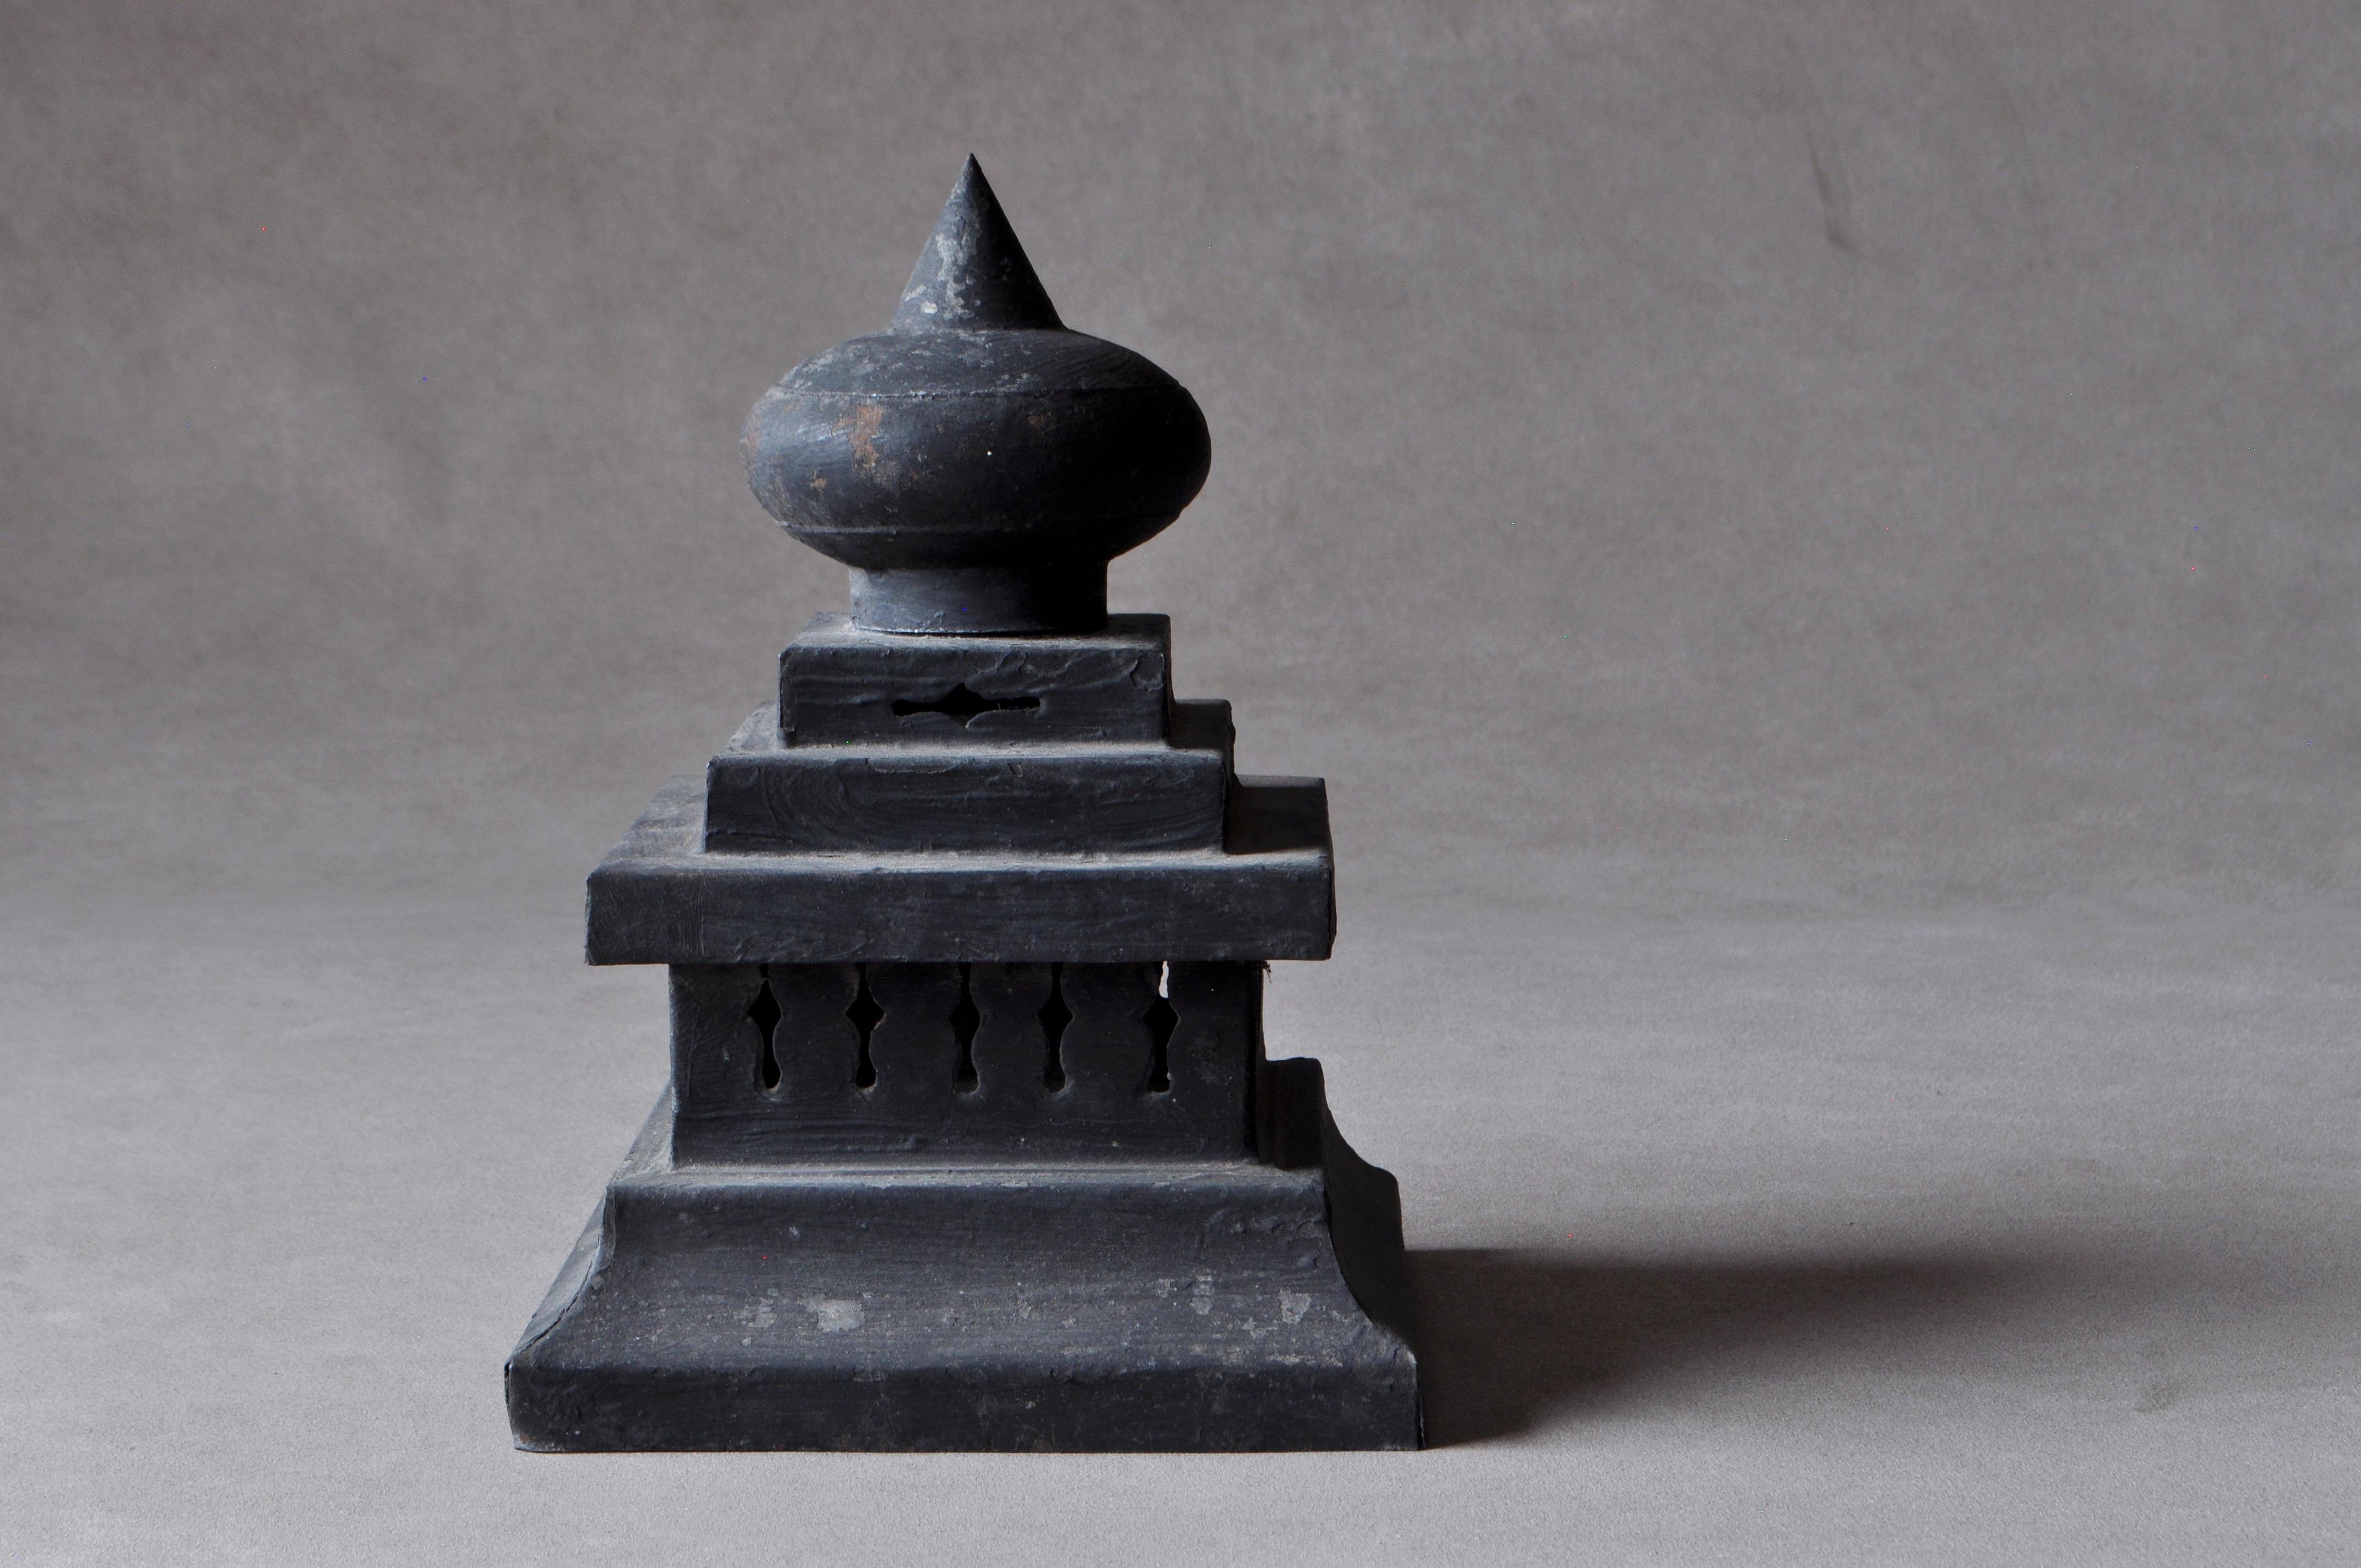 Hand-Crafted Early 20th century Japanese tin-made Buddhist pagoda with Hoju precious orb For Sale